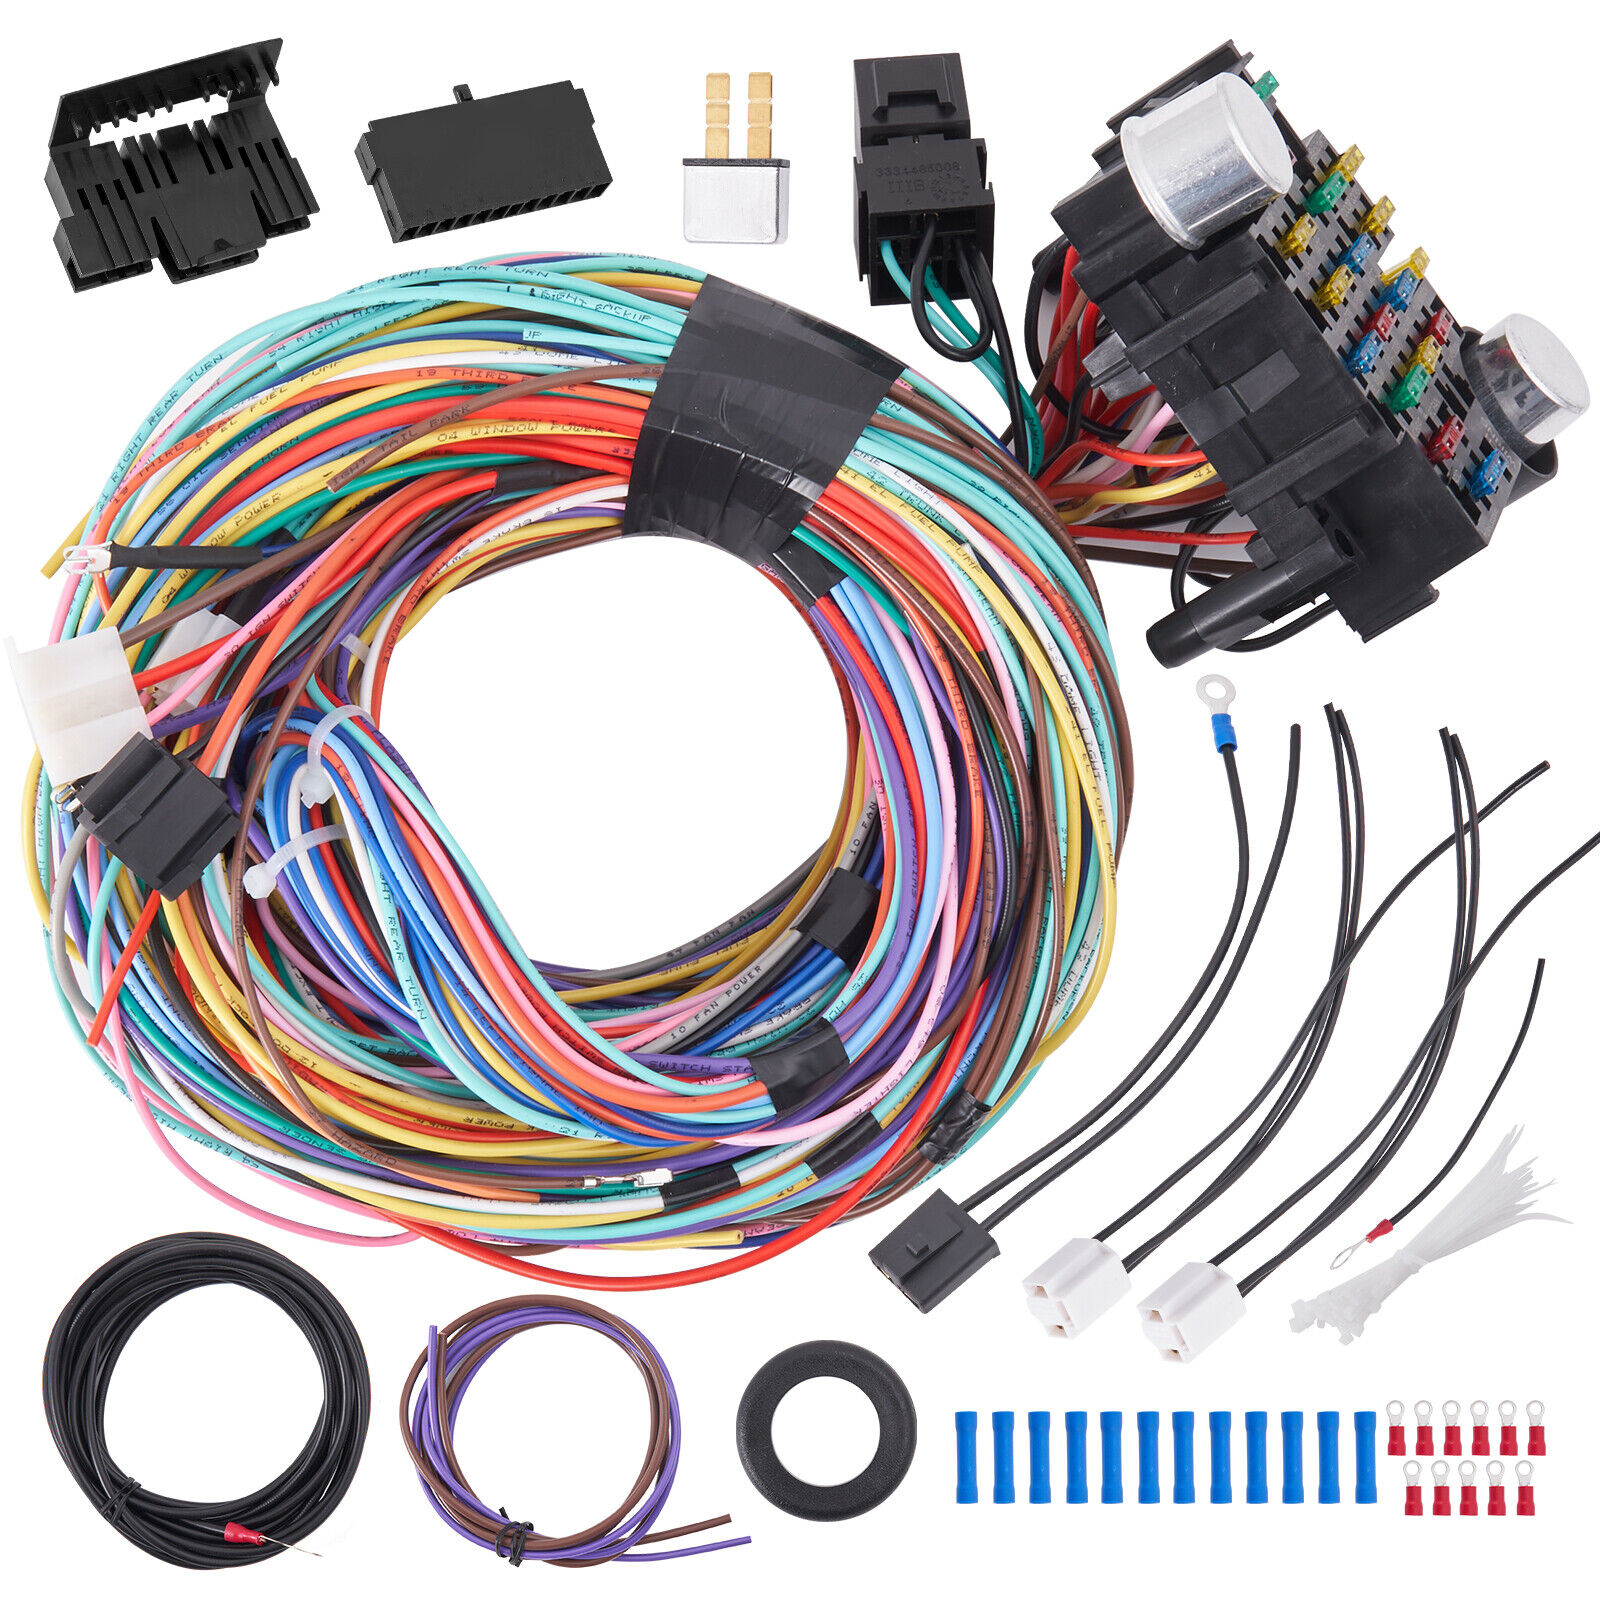 21 Circuit Wiring Harness Universal Extra long Wires For Chevy Mopar Ford Hotrod